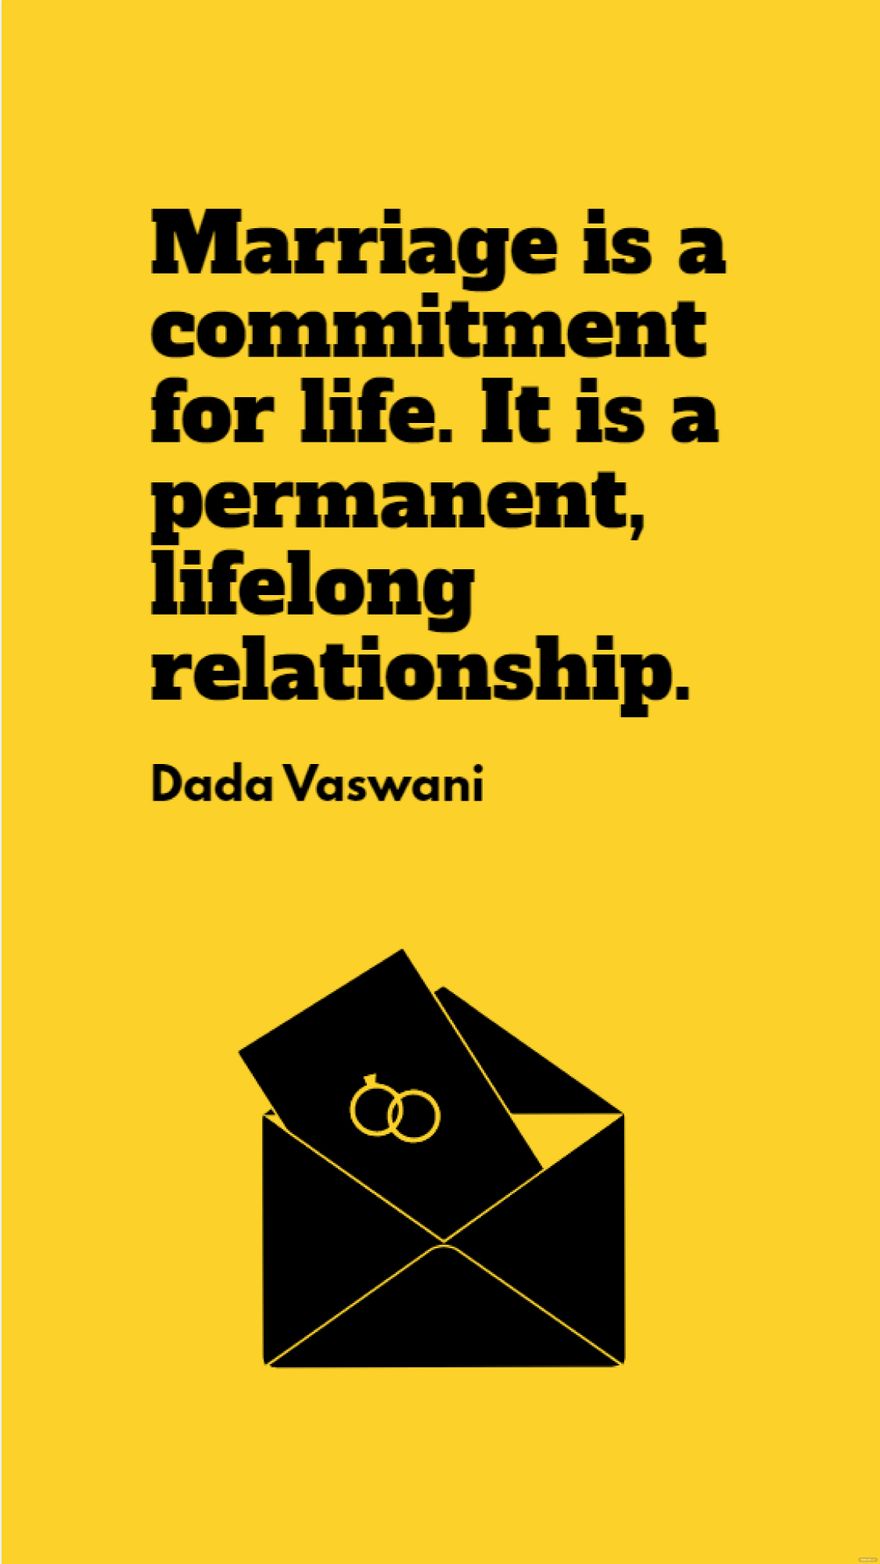 Dada Vaswani - Marriage is a commitment for life. It is a permanent, lifelong relationship.